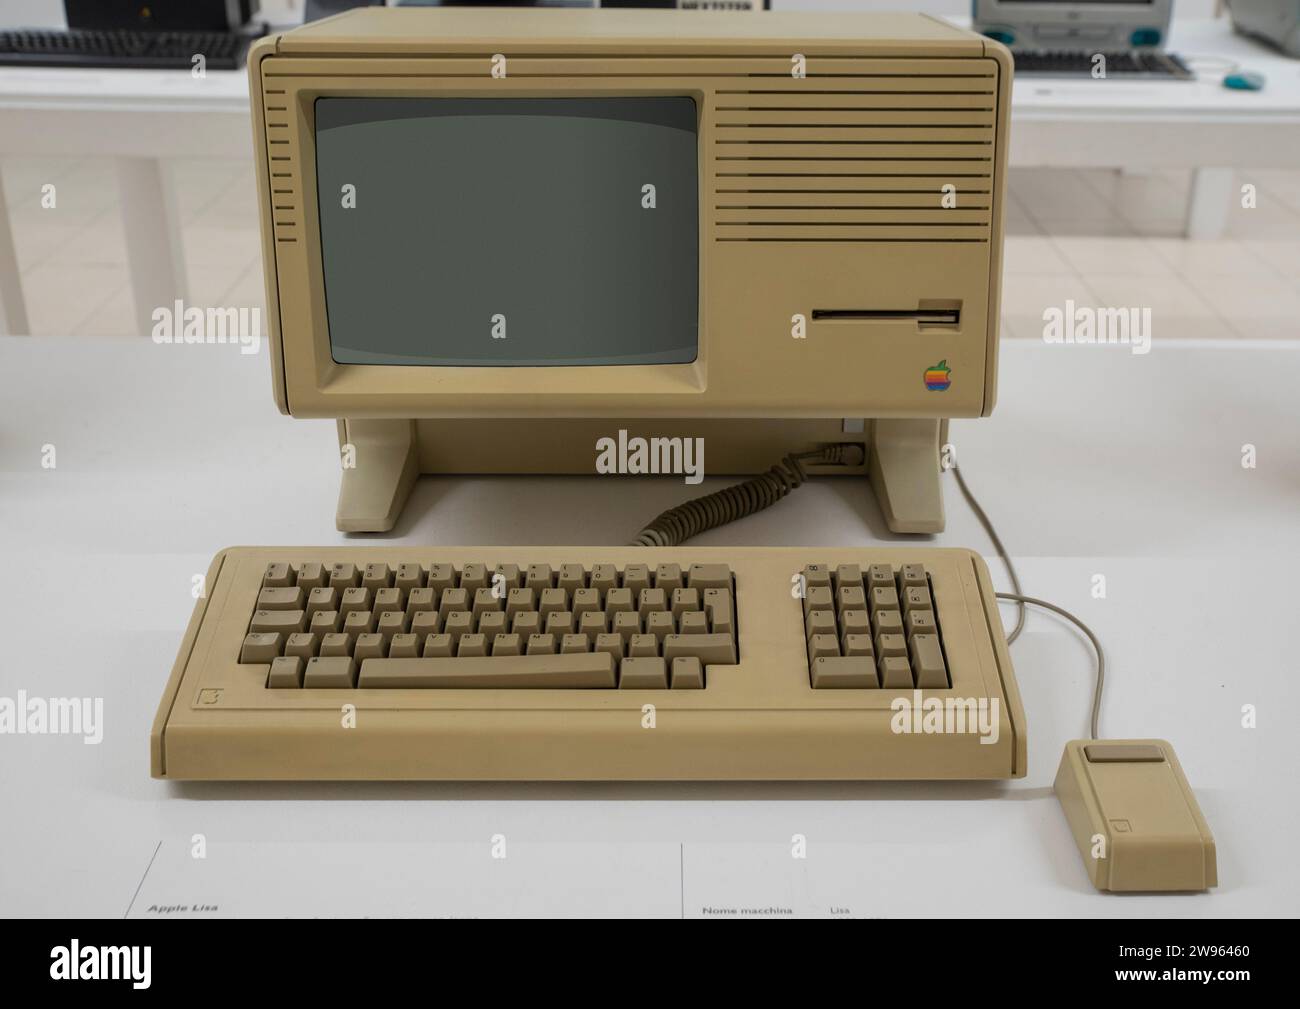 Lisa is a desktop computer developed by Apple, released on January 19, 1983. Pink background. Stock Photo